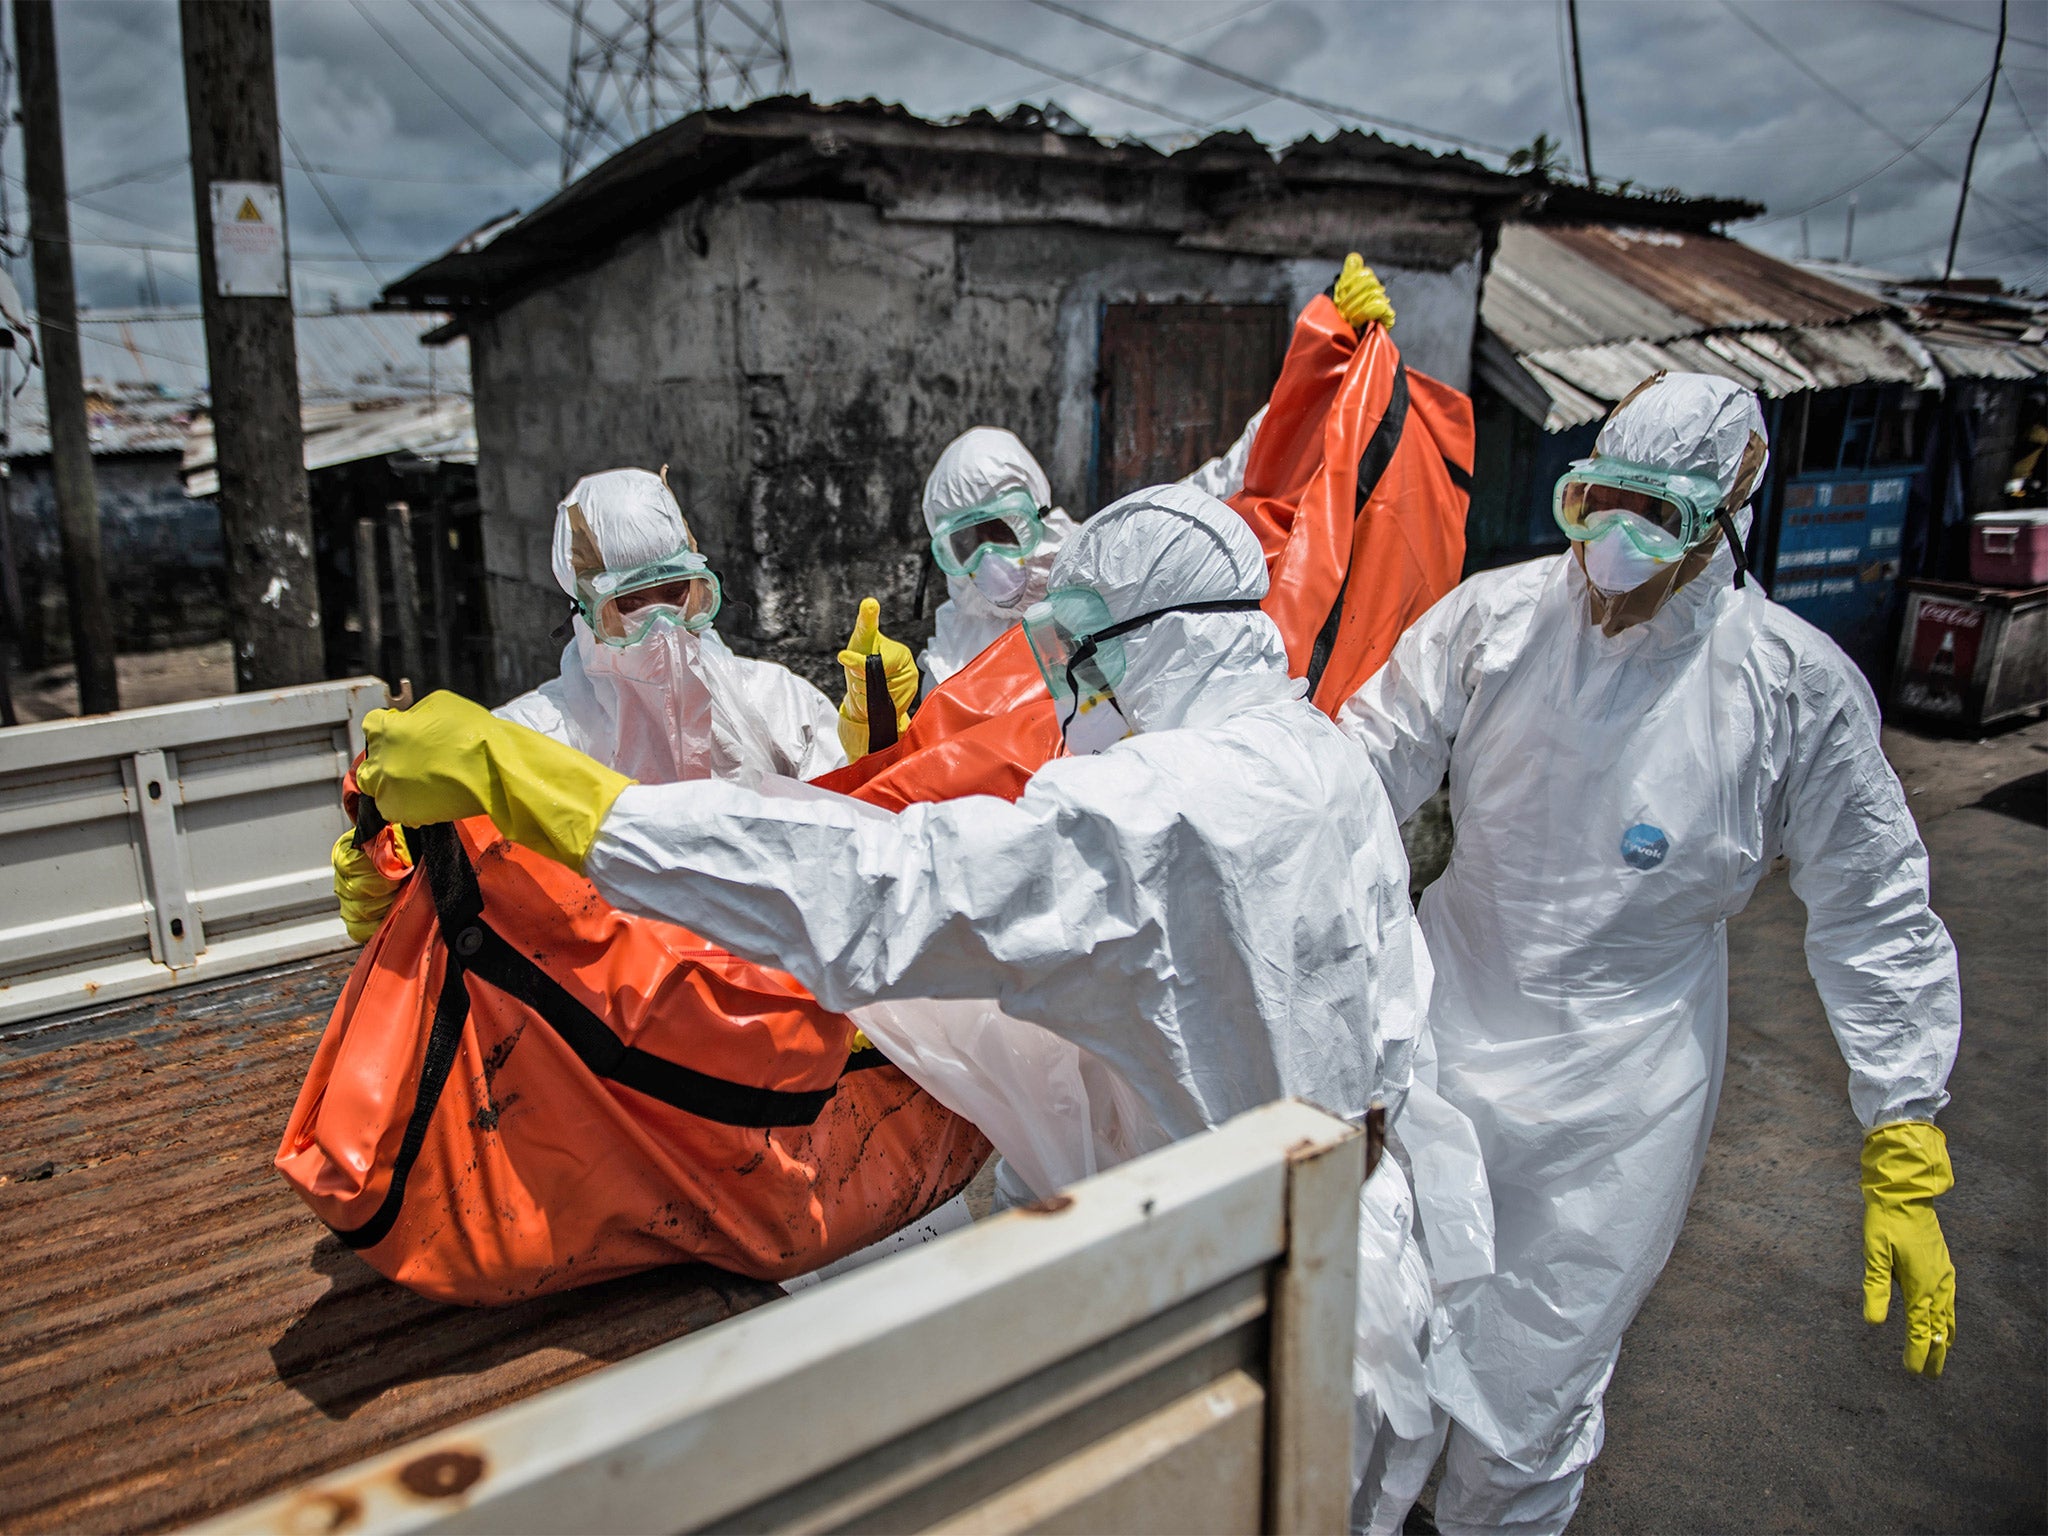 Red Cross members carry the body of an Ebola victim in Monrovia, Liberia, earlier this month